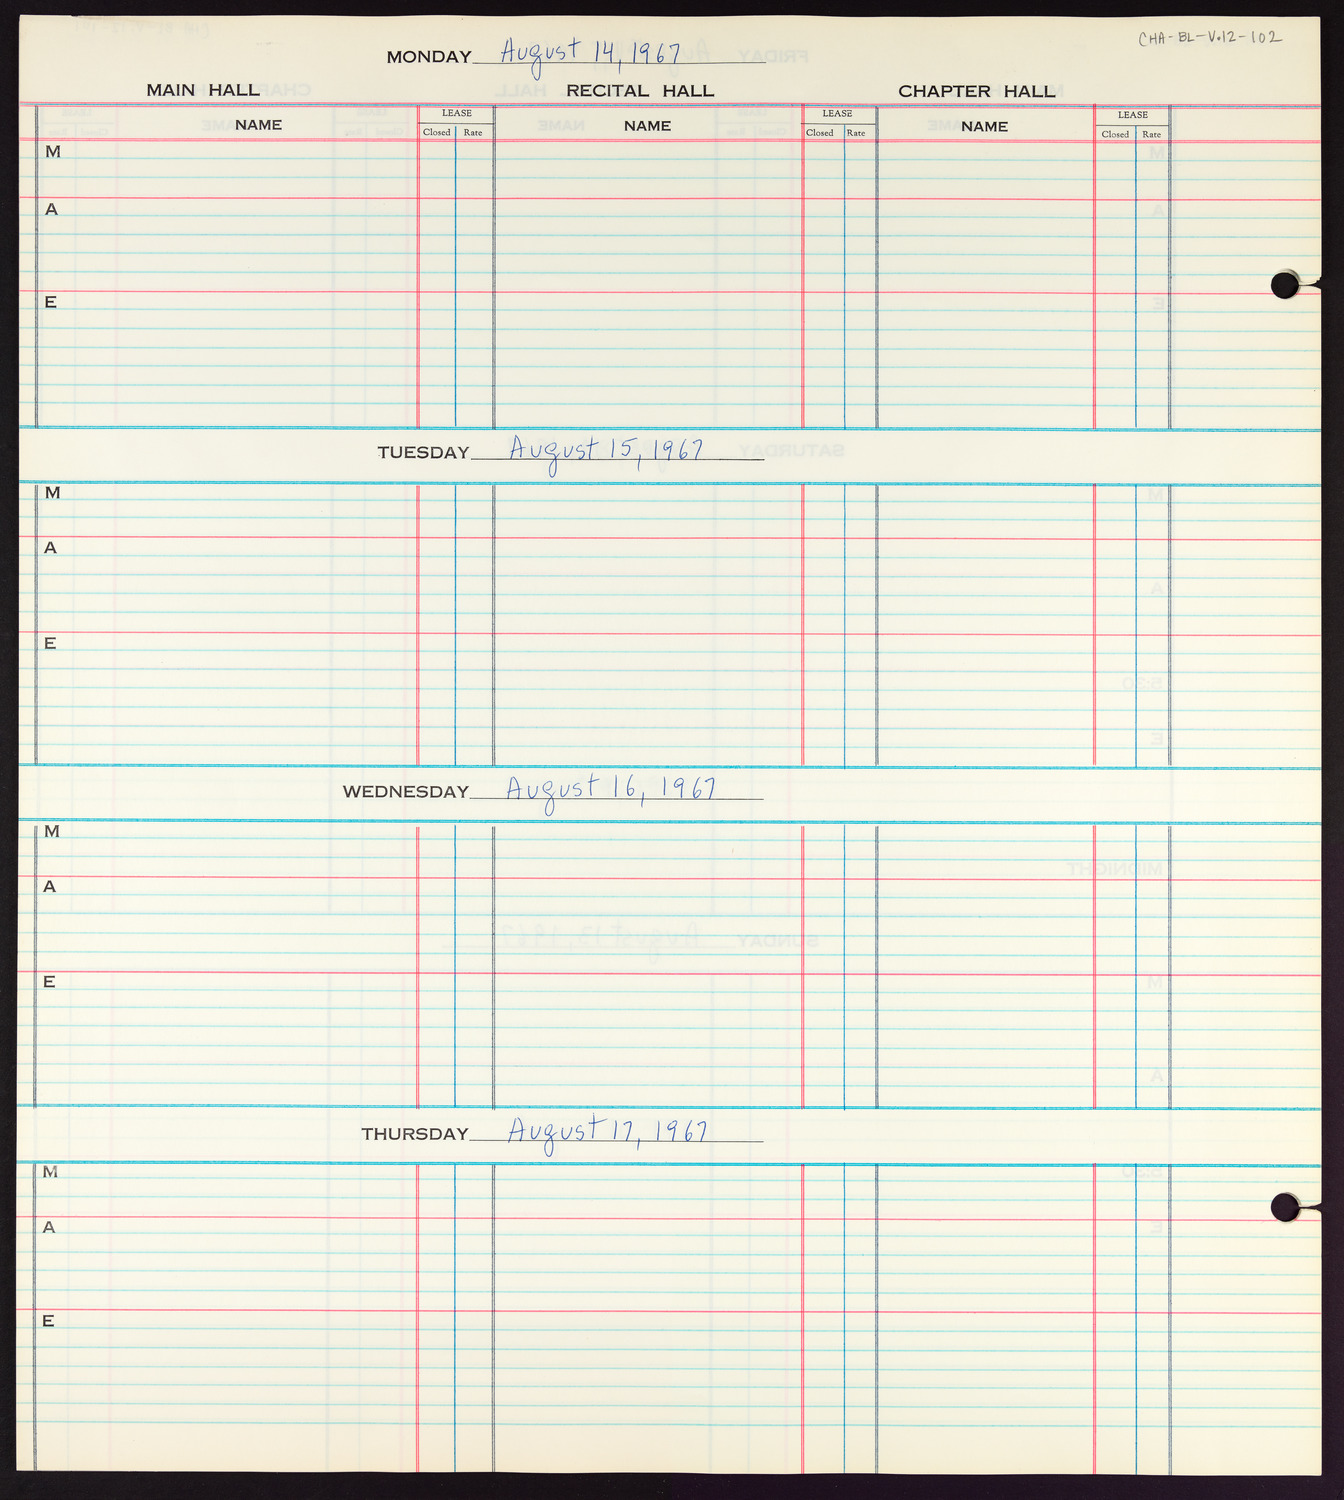 Carnegie Hall Booking Ledger, volume 12, page 102